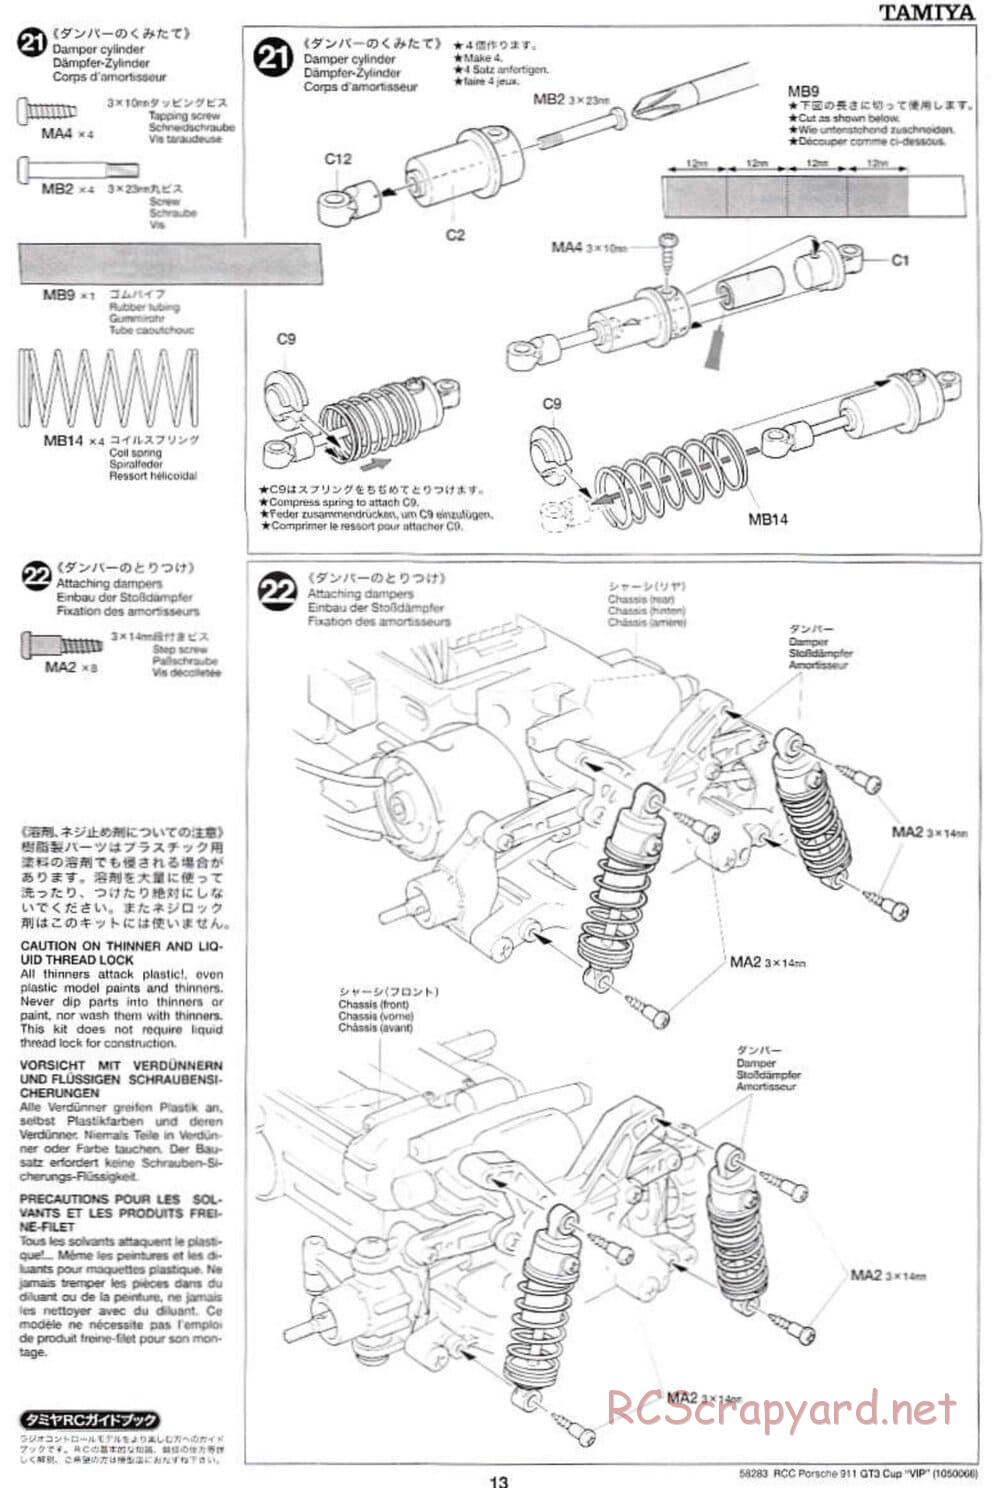 Tamiya - Porsche 911 GT3 Cup VIP - TL-01 Chassis - Manual - Page 13